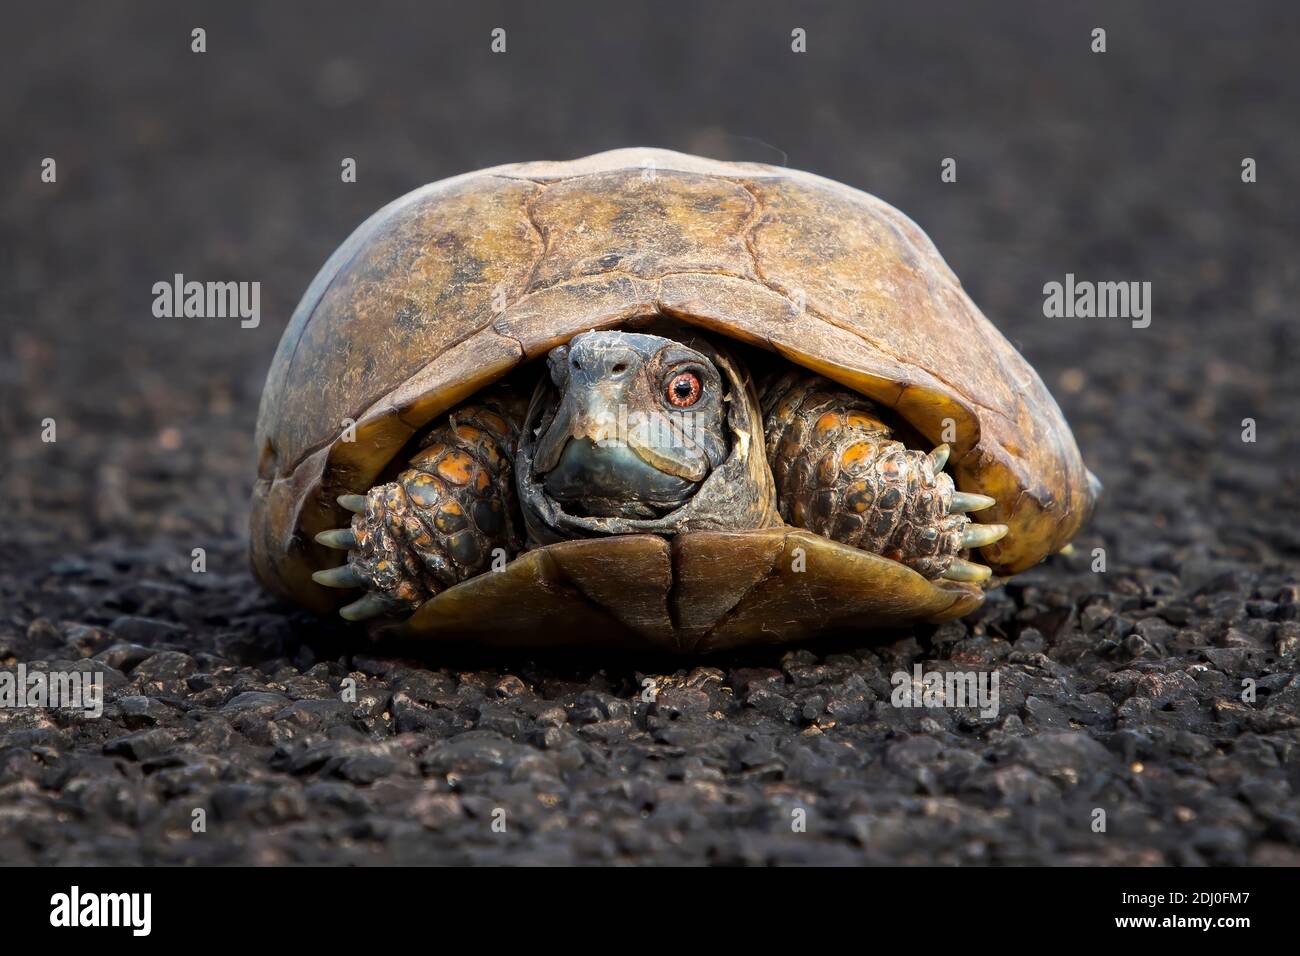 Male ornate or desert box turtle with bright red eyes in low angle close up sitting in road in Arizona. Stock Photo